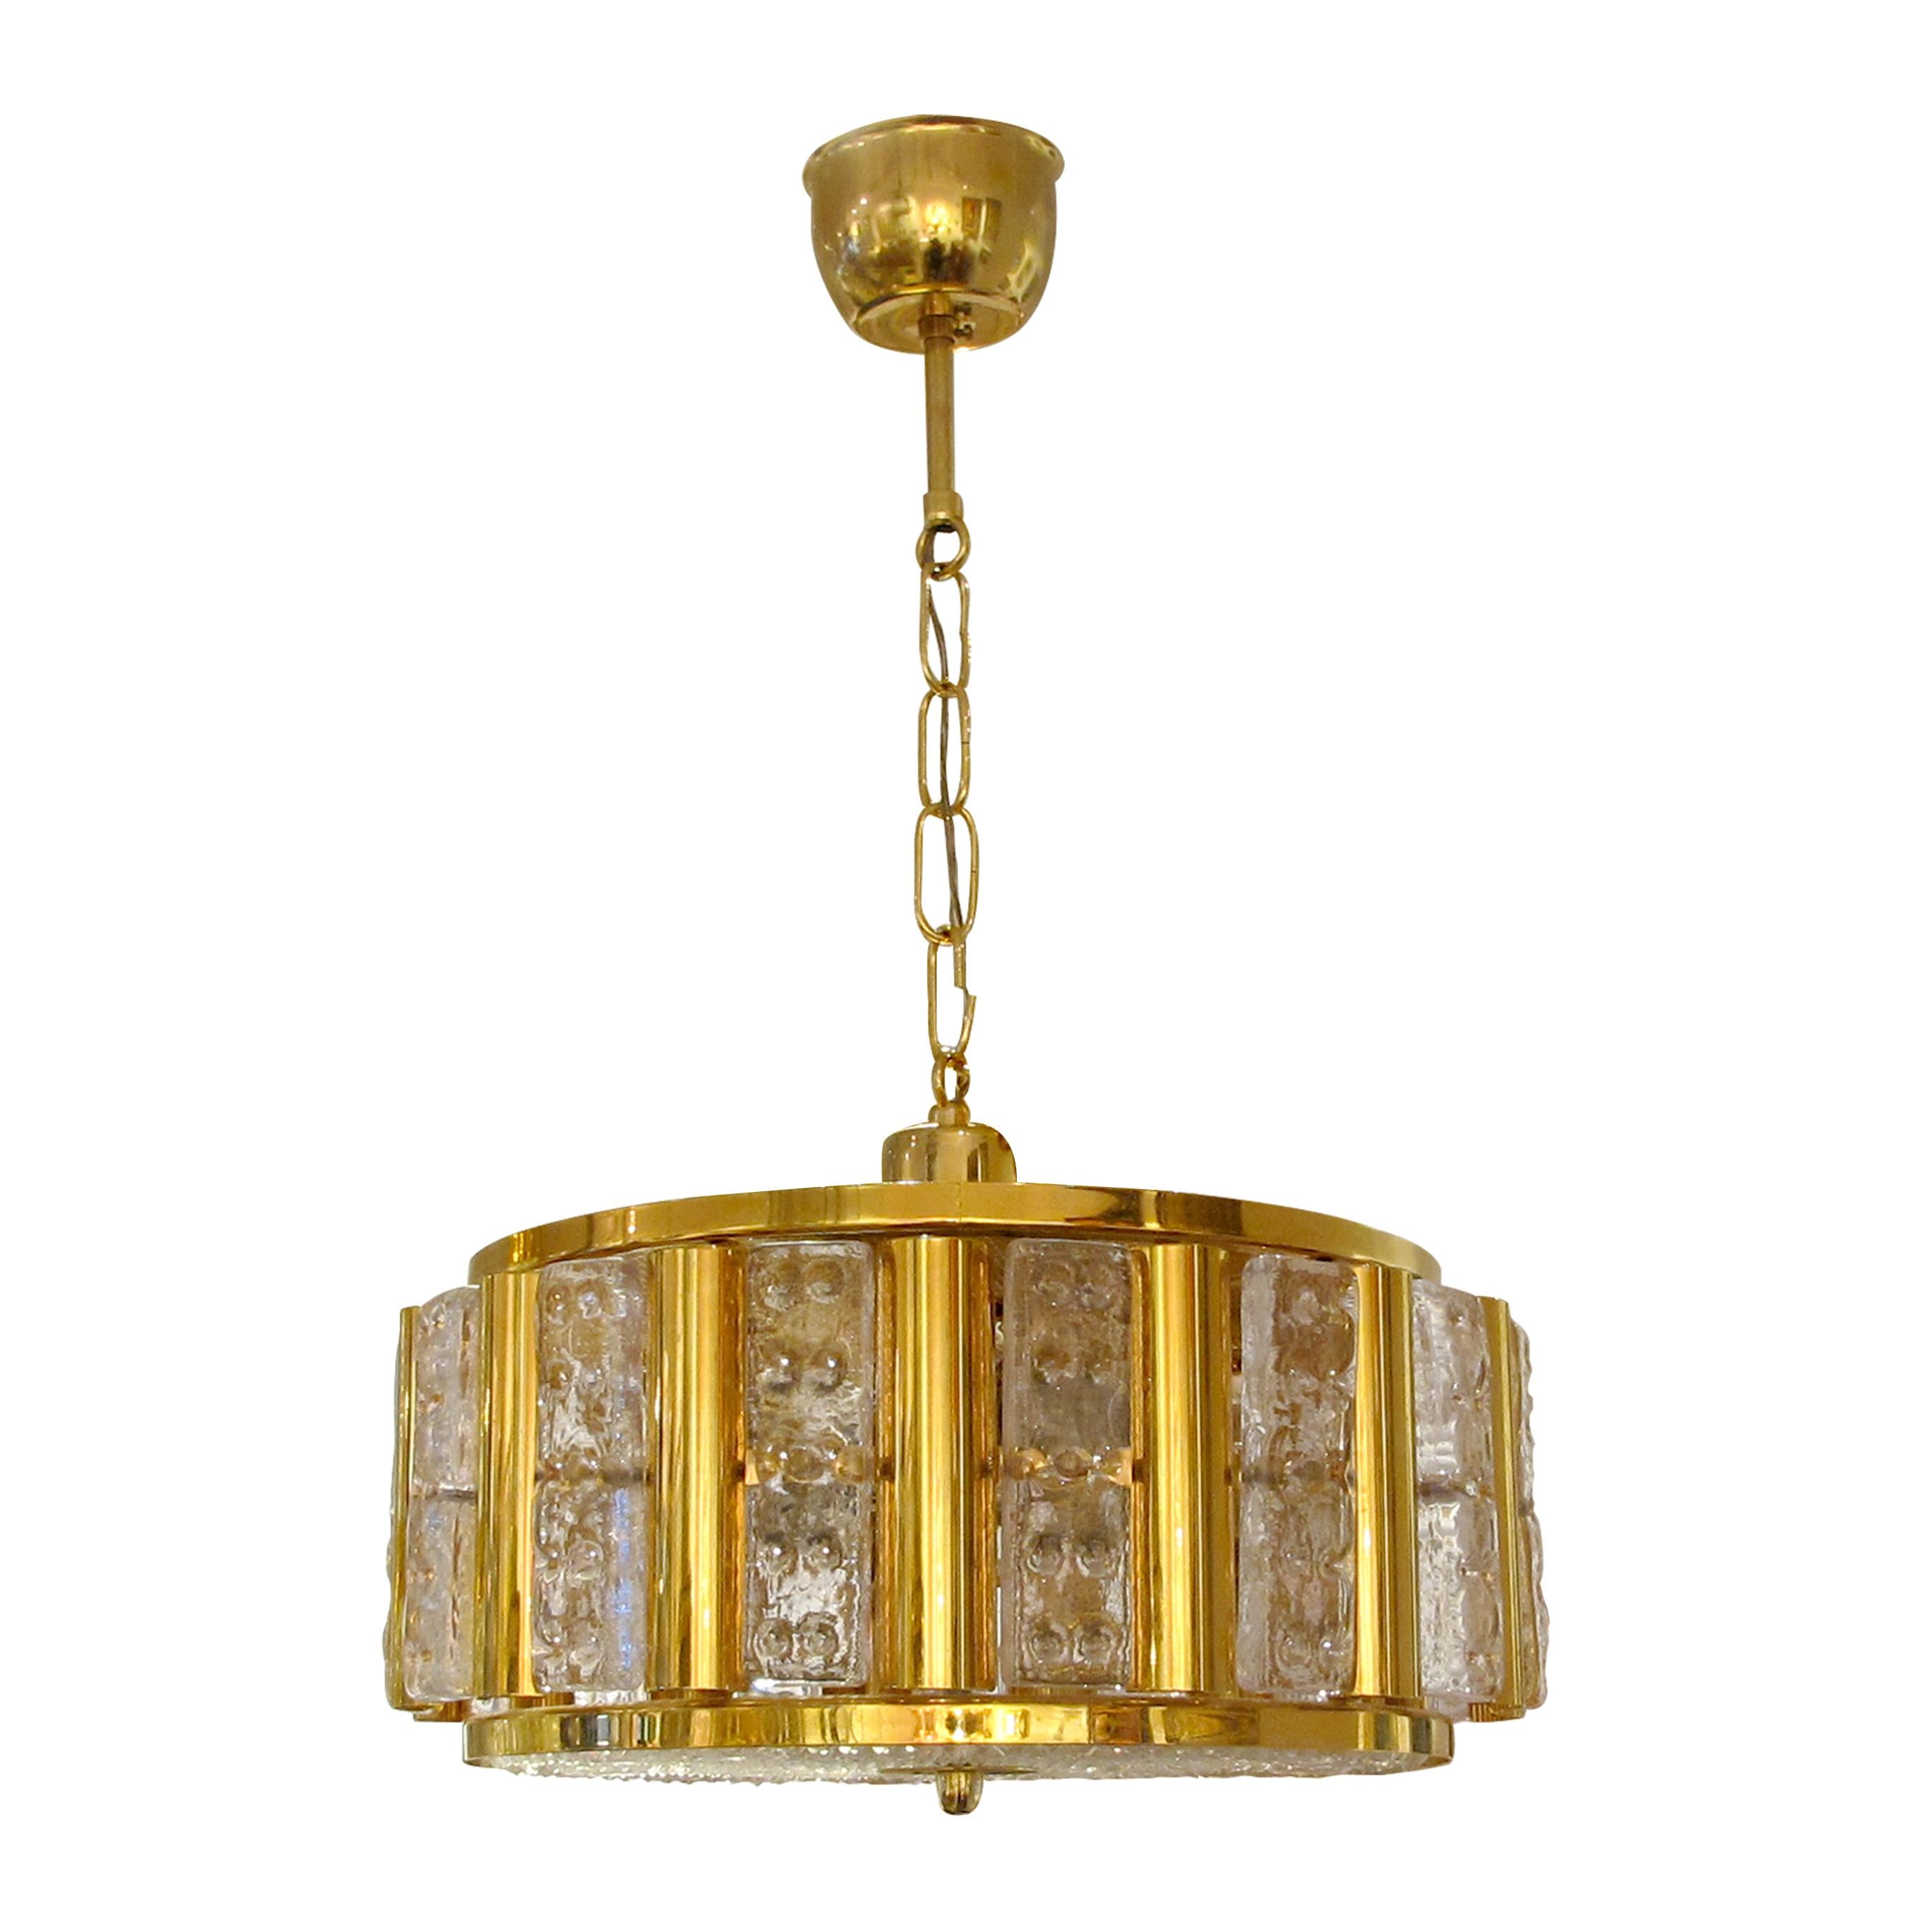 Pair of 1960s glass and polished brass ceiling hanging lights designed by Carl Fagerlund and manufactured by Orrefors in Sweden. These elegant lights are in great condition and offer warm lighting ideal for over a counter side by side. The lights